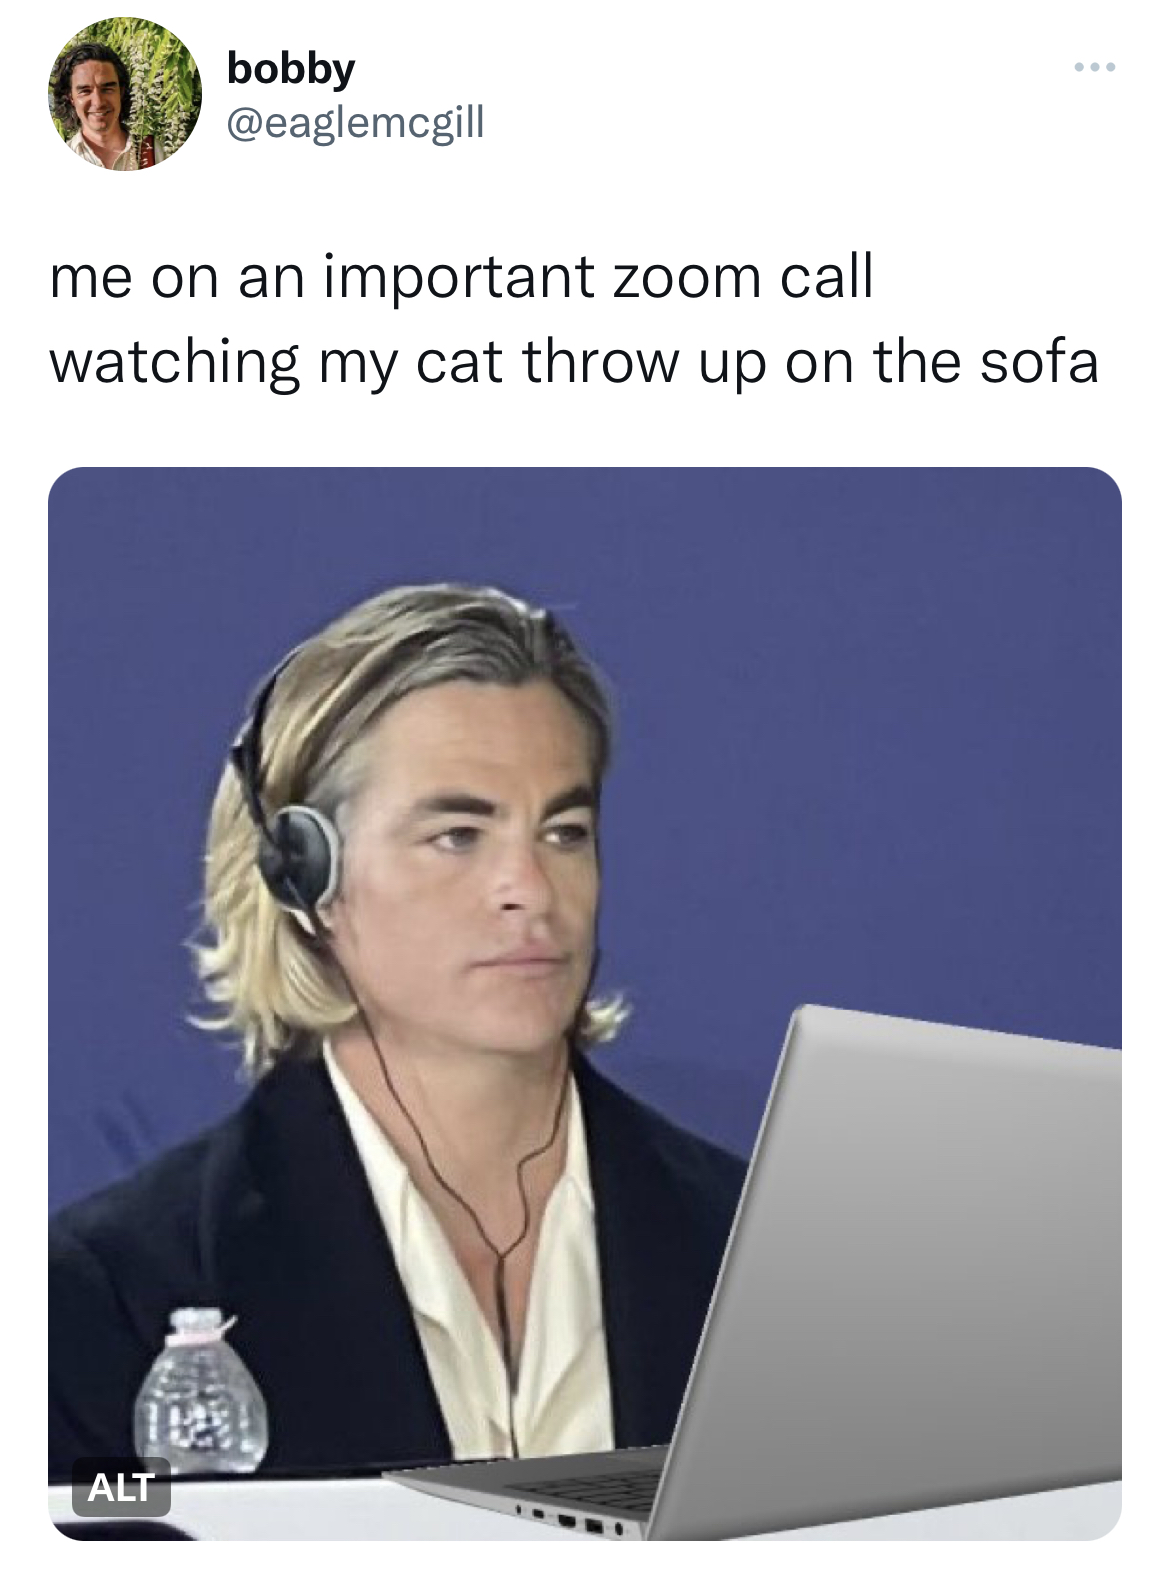 Chris Pine Venice Film Festival Memes - Chris Pine - bobby Alt www me on an important zoom call watching my cat throw up on the sofa